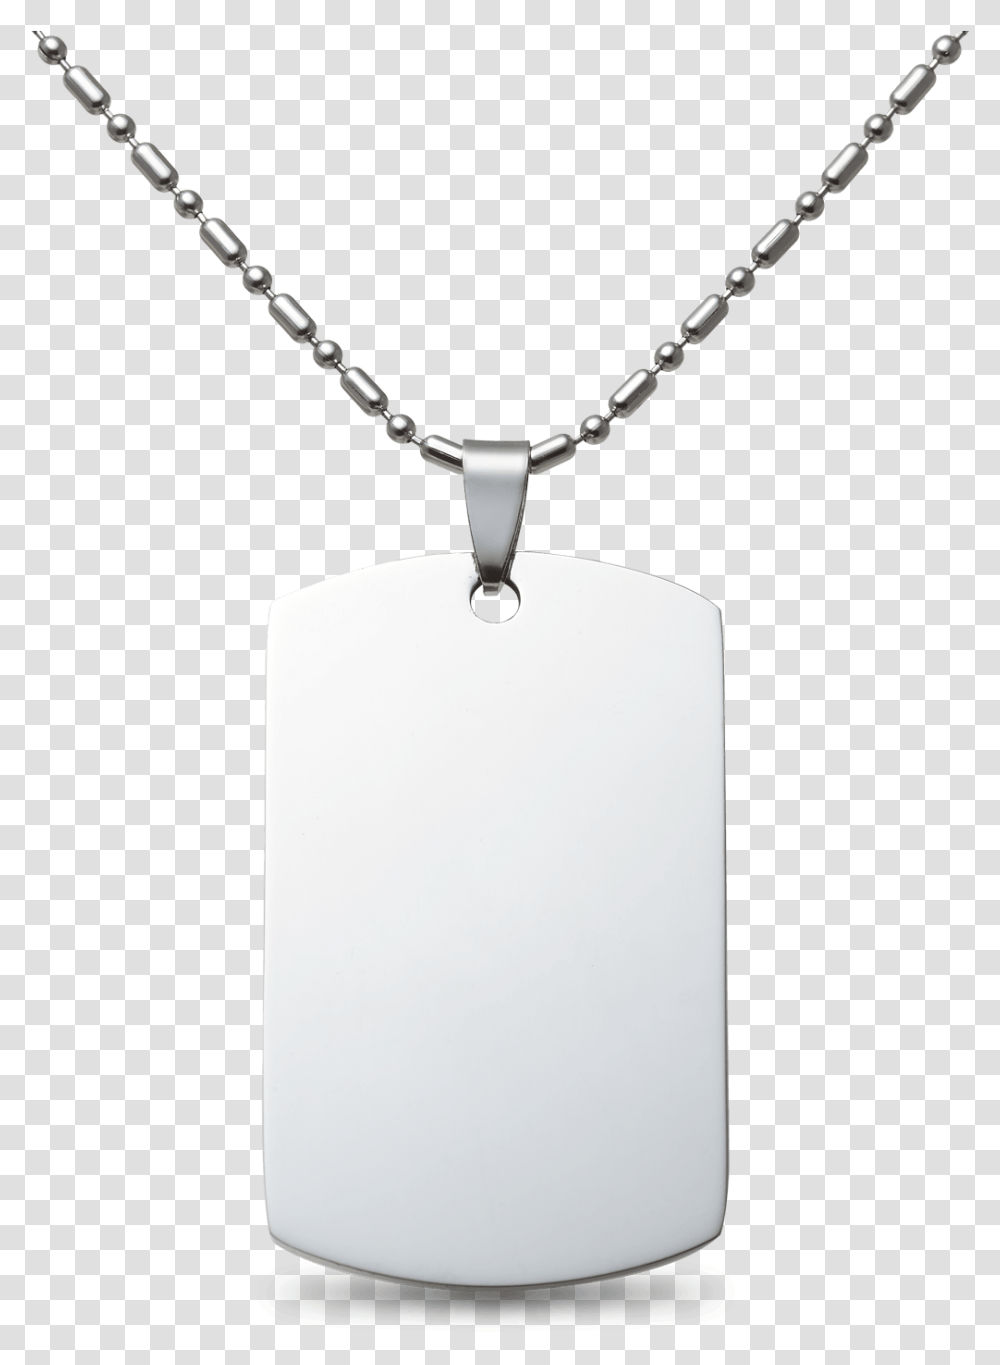 Locket Dog Tag Necklace Charms Amp Pendants Chain, Jewelry, Accessories, Accessory, Paper Transparent Png